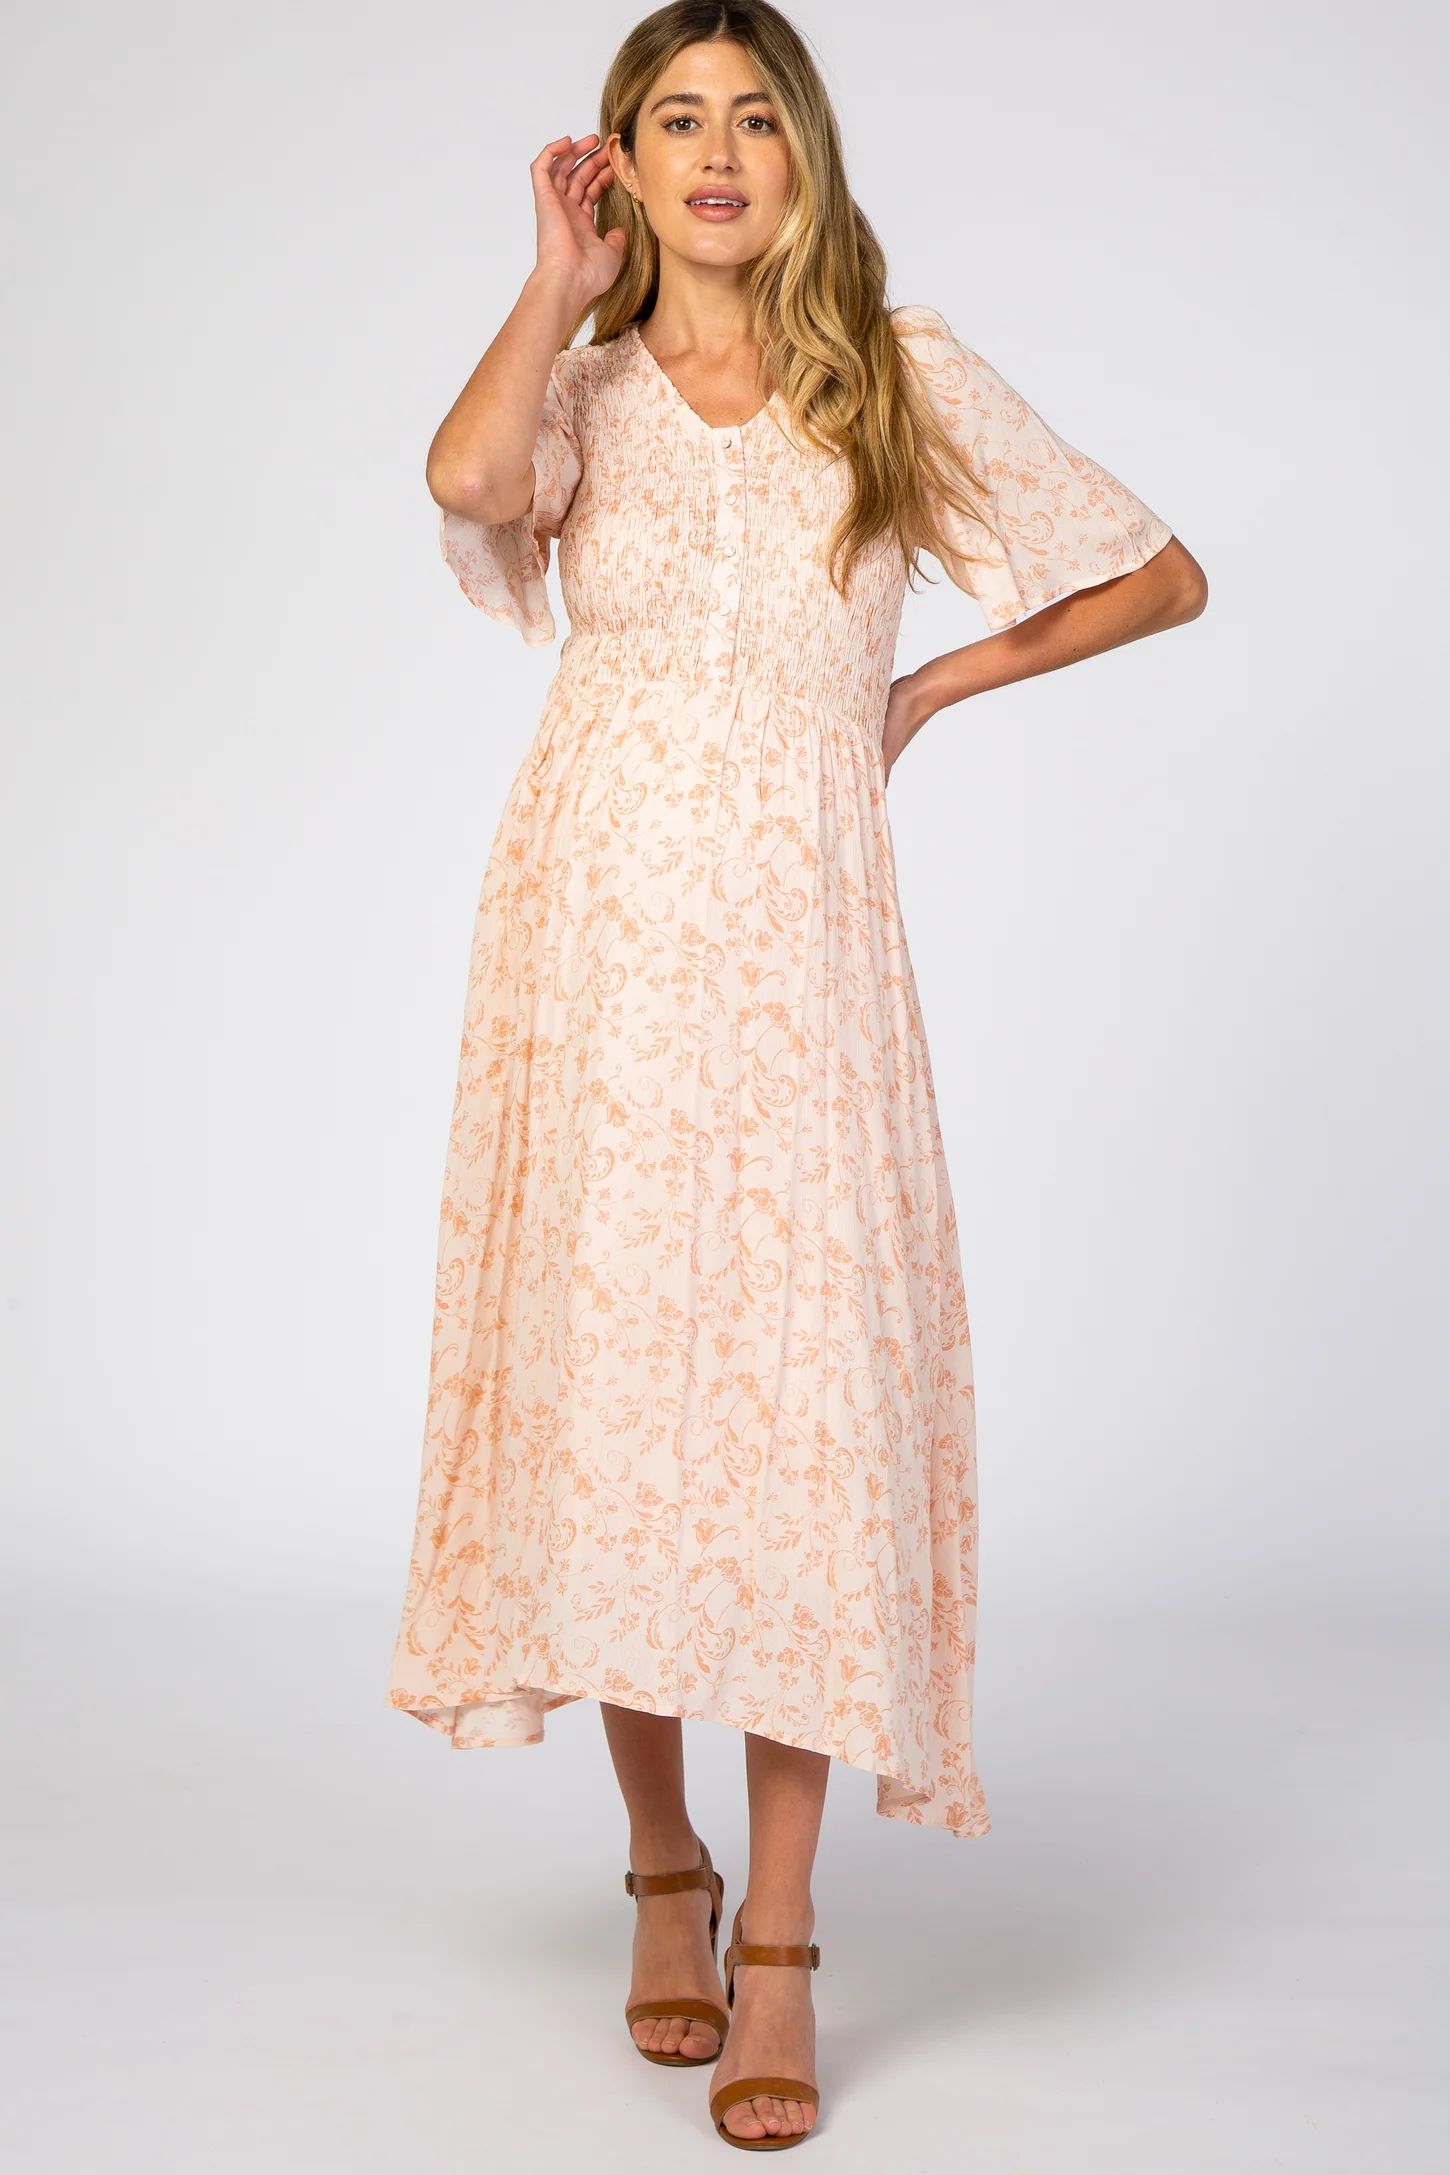 Peach Floral Button Front Smocked Maternity Midi Dress | PinkBlush Maternity